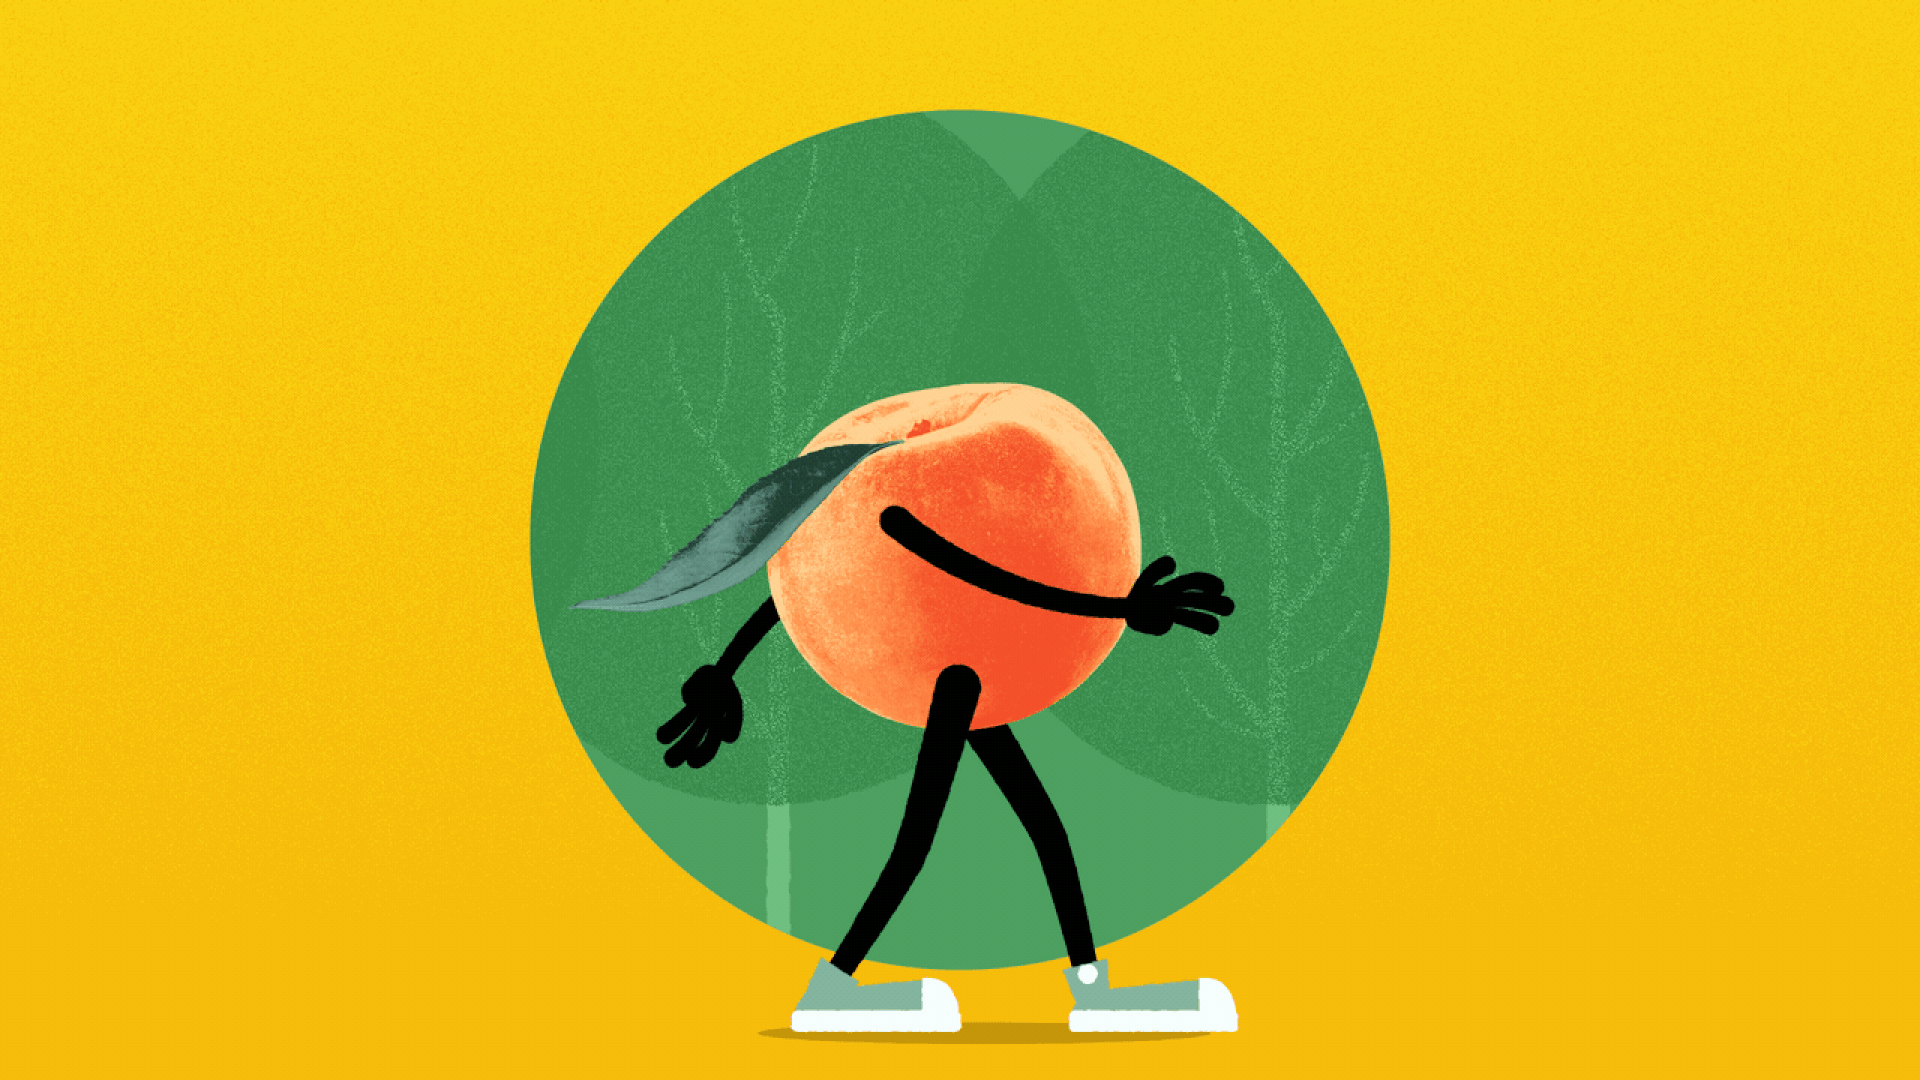 Illustration of a peach with arms and legs walking past some trees. 